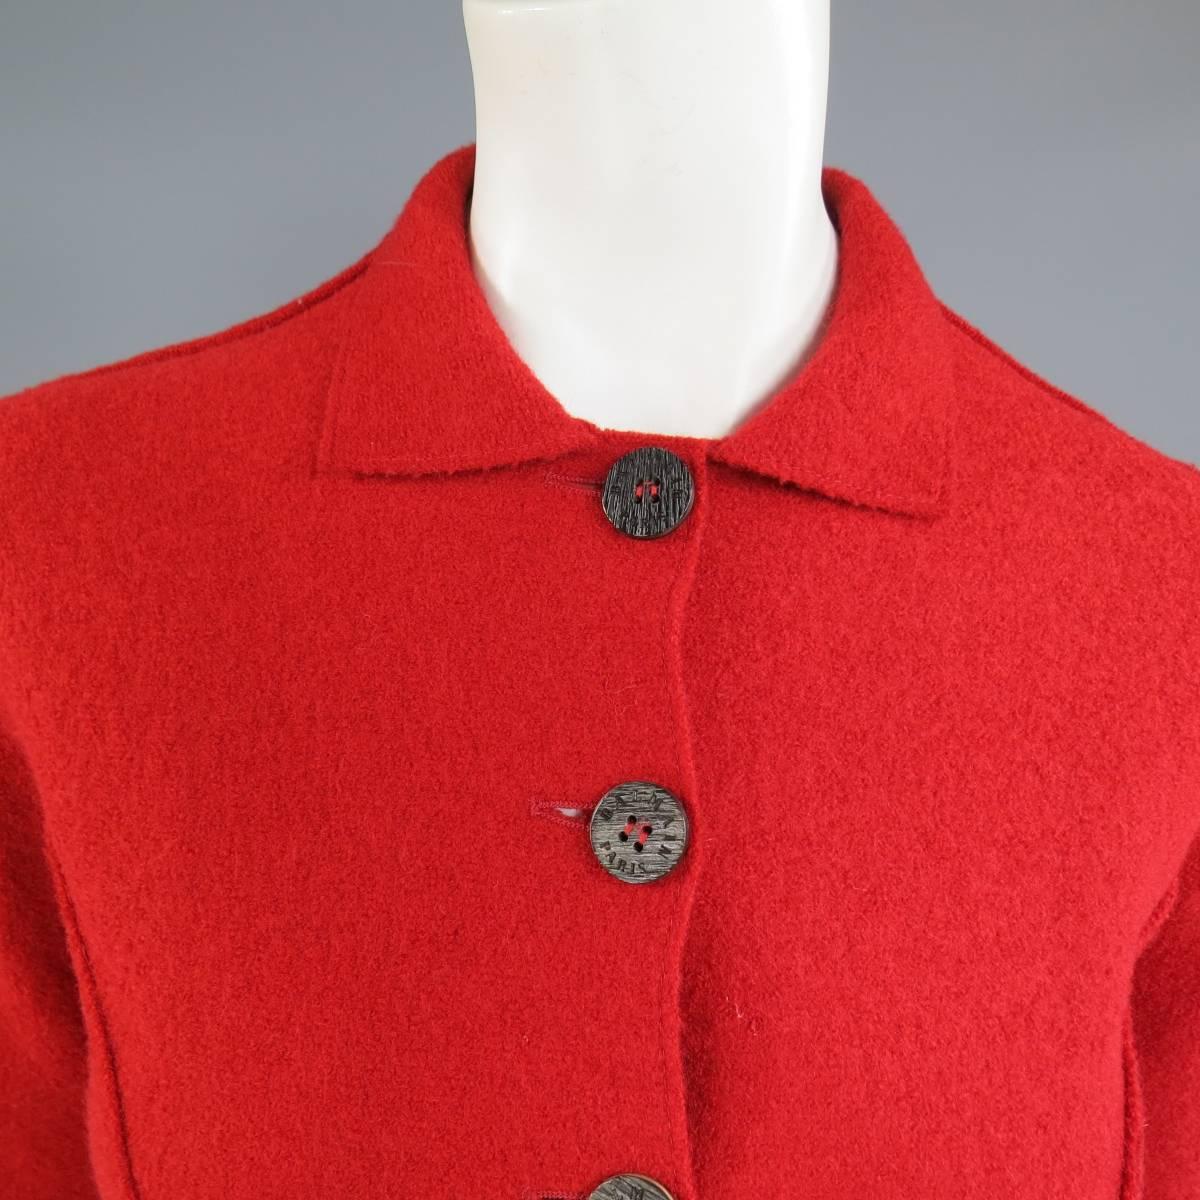 This rare vintage BALMAIN soft shoulder jacket comes in a soft red wool textured felt and features a tailored silhouette, reverse seam bust darts, cuffed sleeves, engraved wooden buttons, pointed collar.  Made in Italy.
 
Excellent Pre-Owned